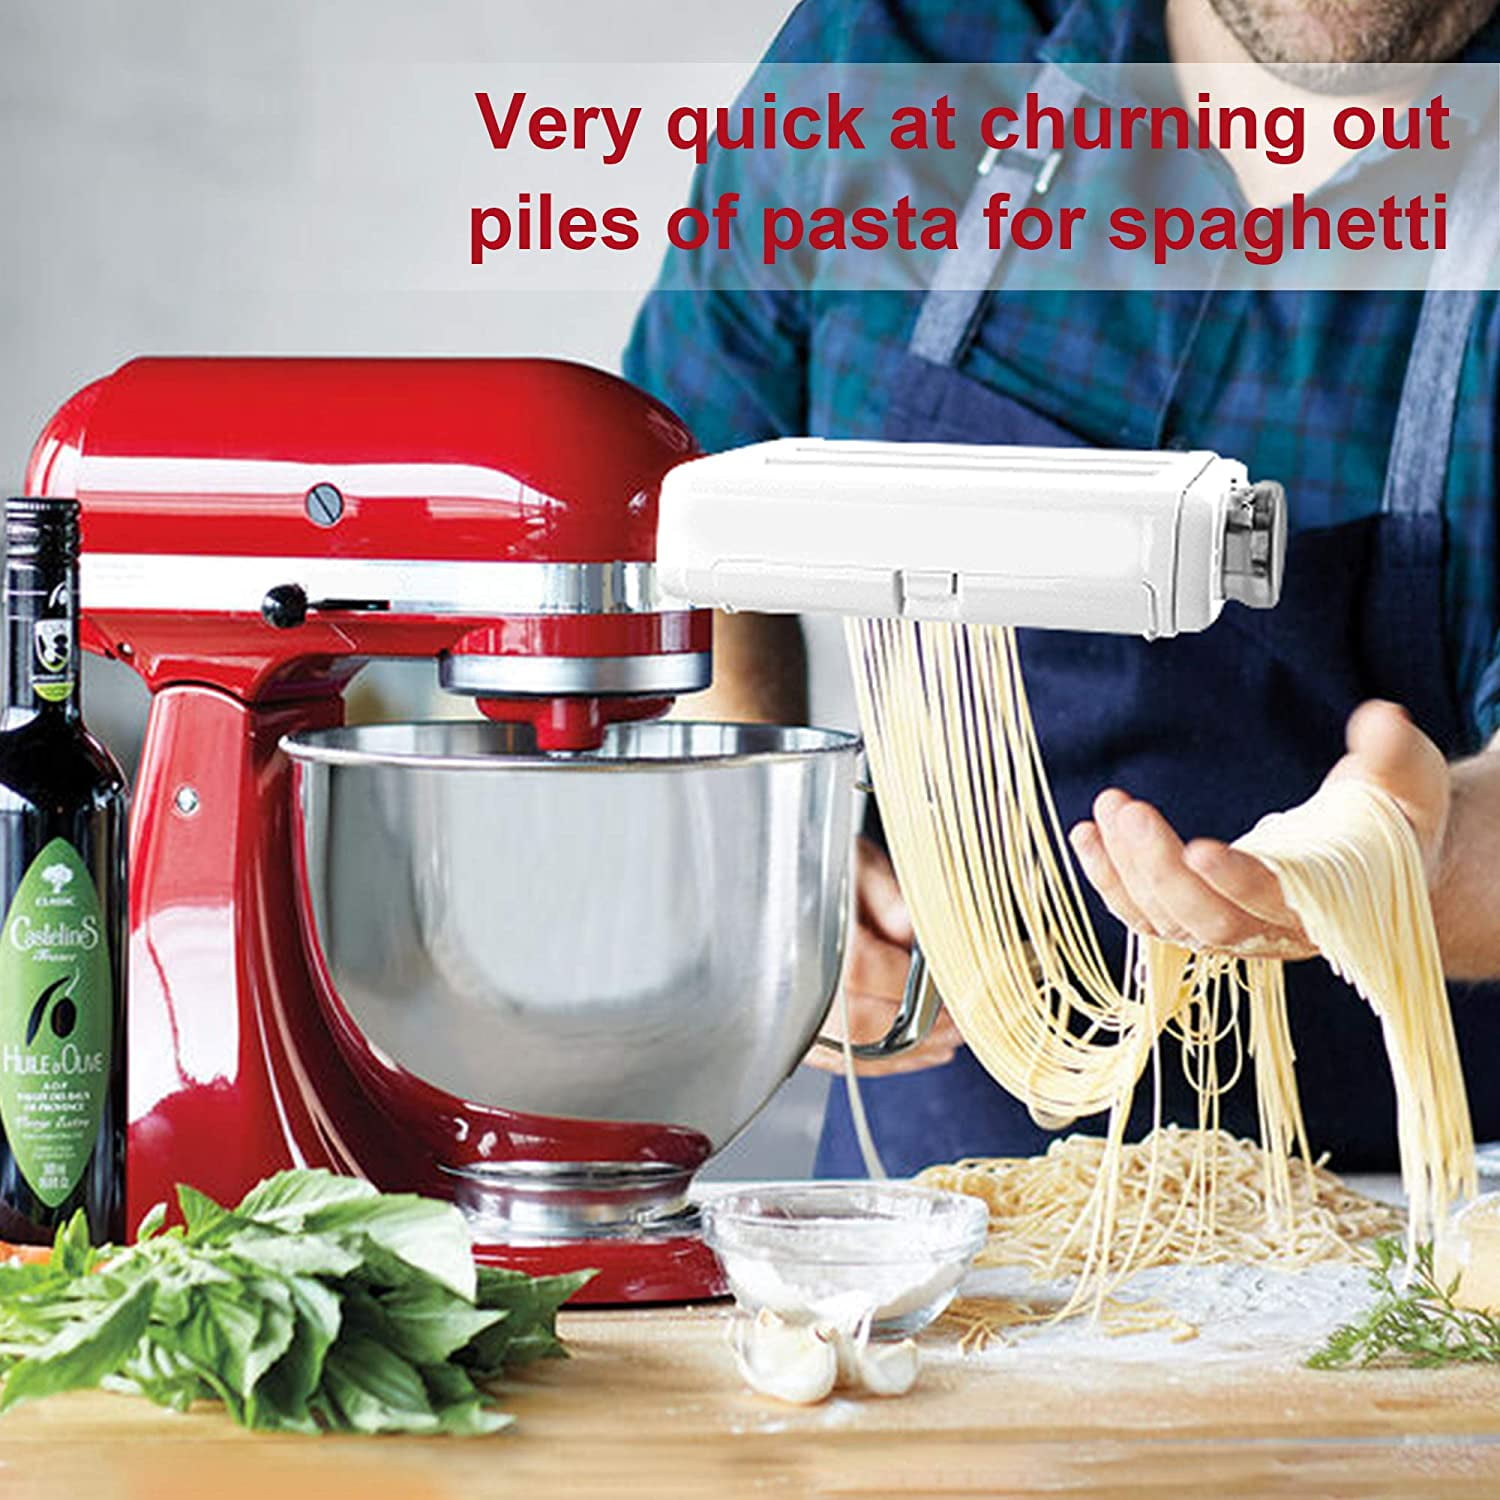 Pasta Maker Attachment for Kitchenaid Mixers, Noodle Maker 3 in 1 Set of  Pasta Sheeter Fettuccine Cutter Spaghetti Cutter and Cleaning Brush,  Kitchen